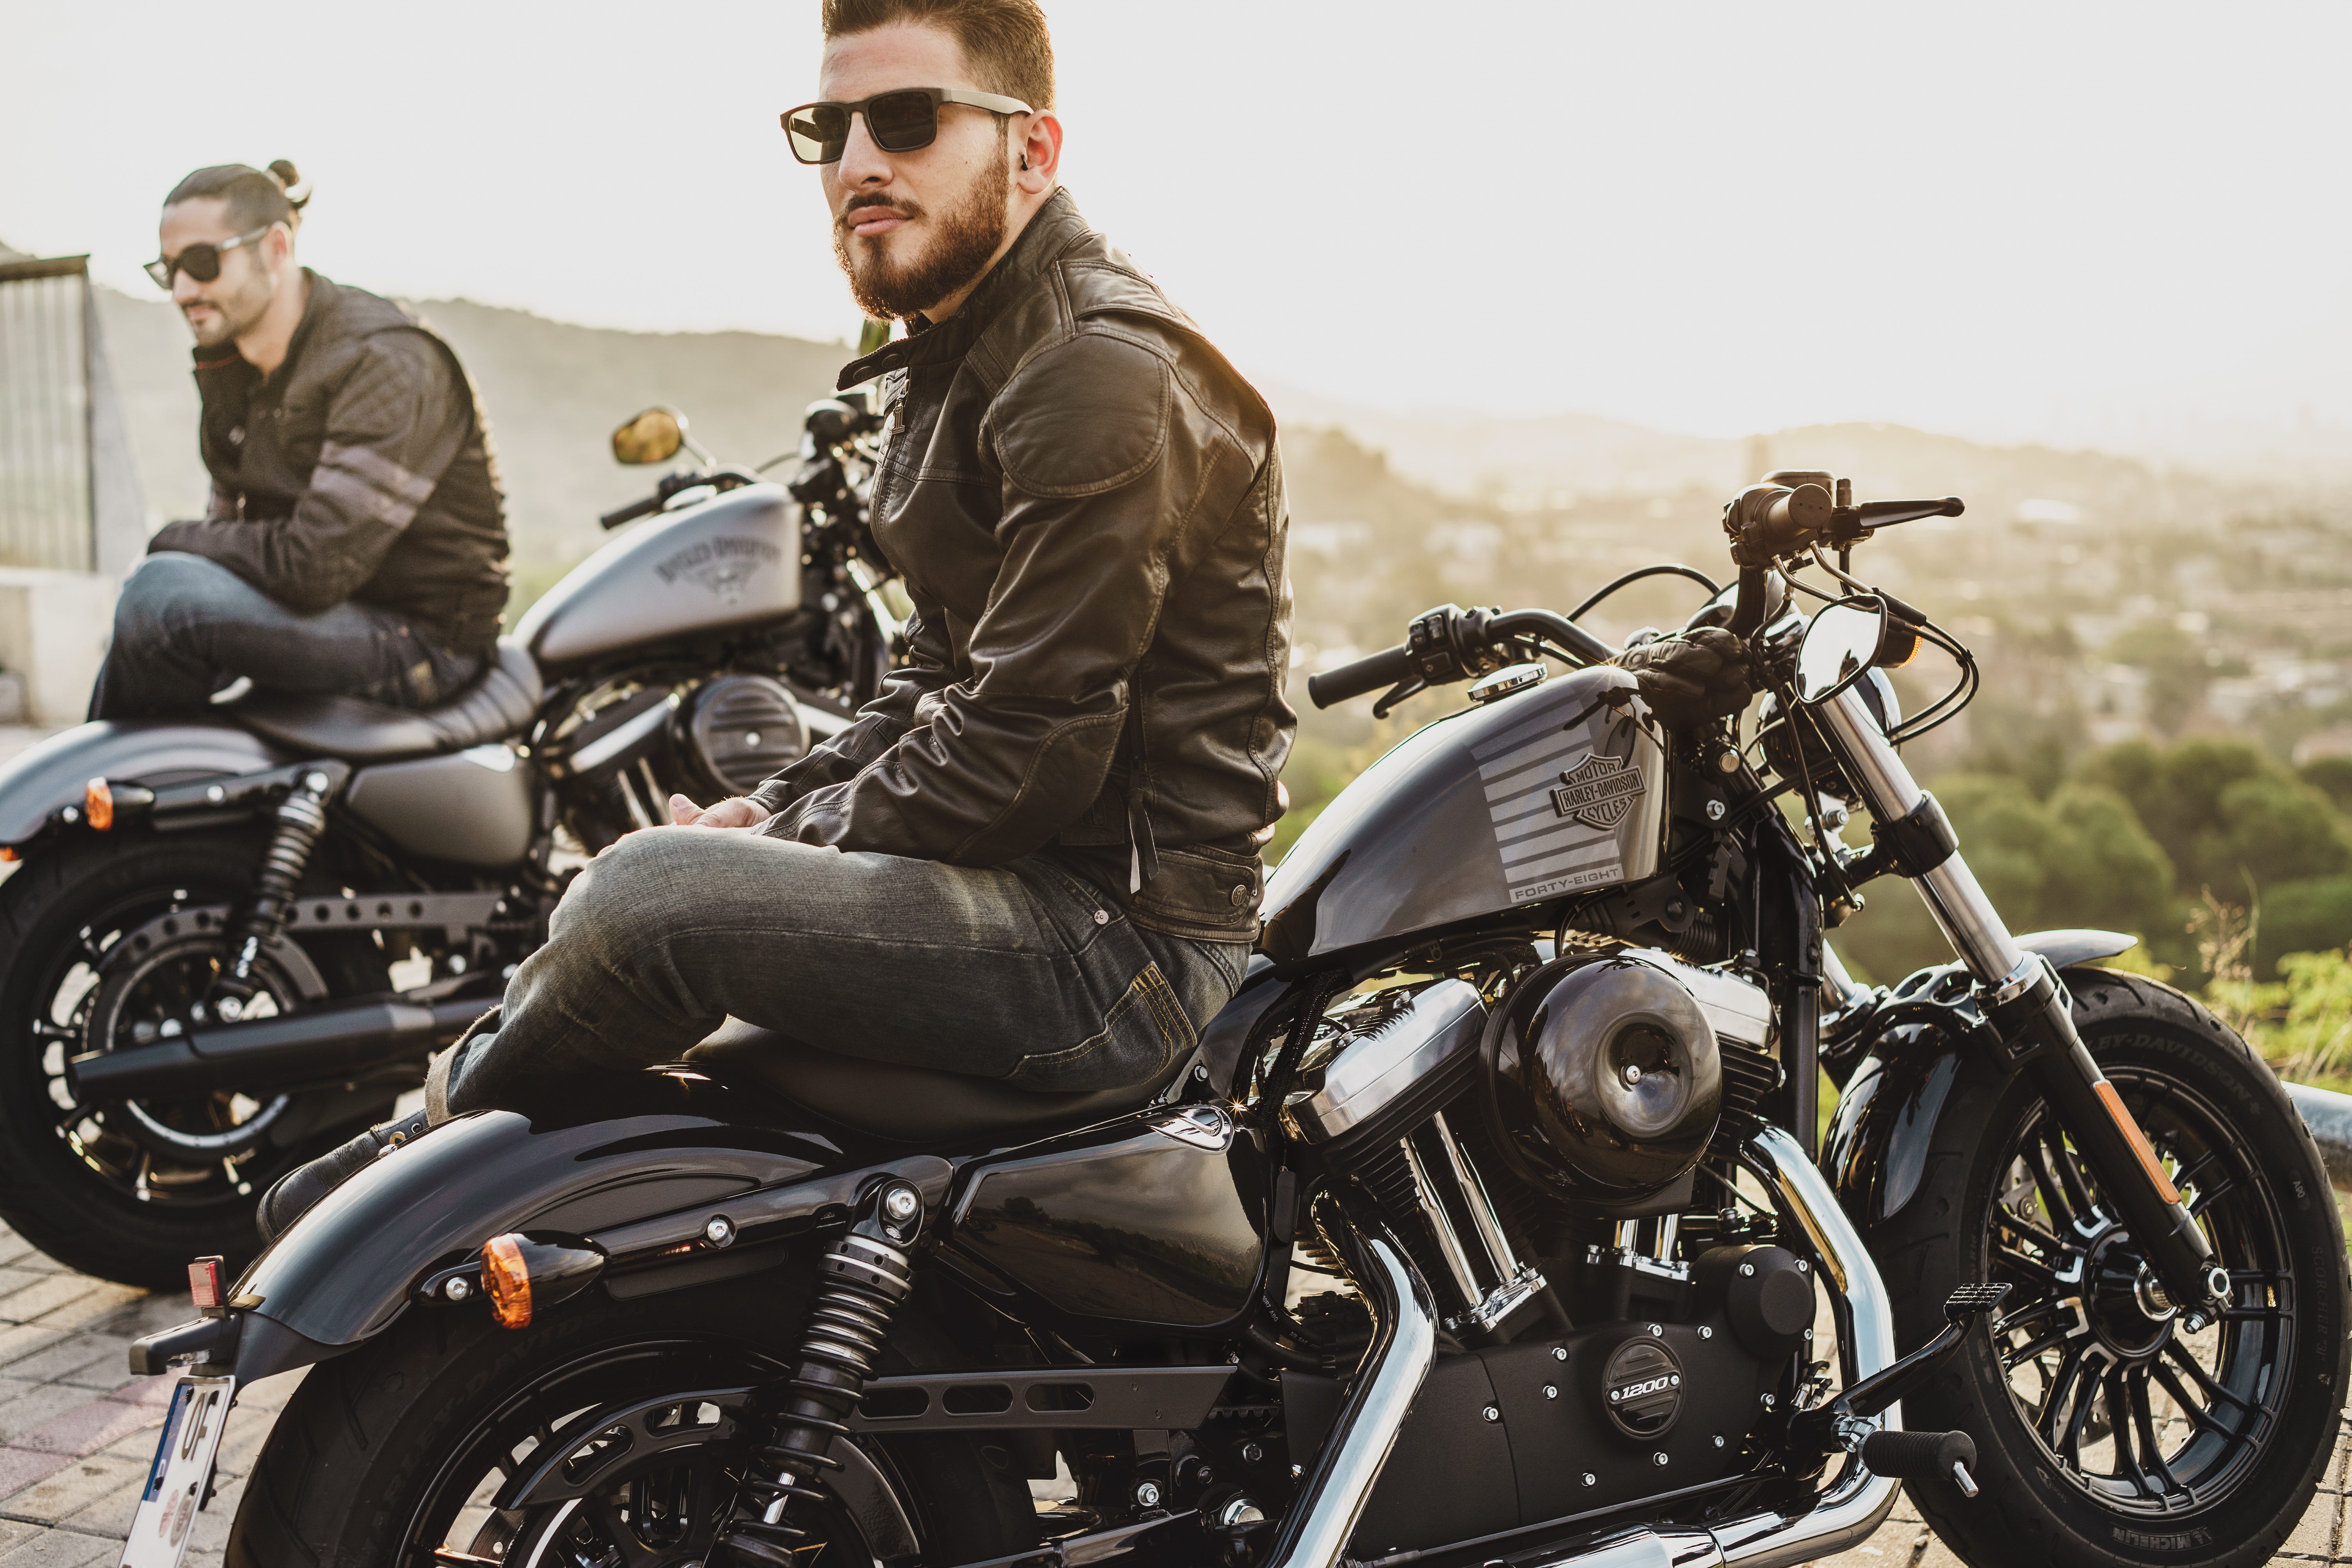 Can Harley Davidson Roar Back to the Future?   by Paul Myers MBA